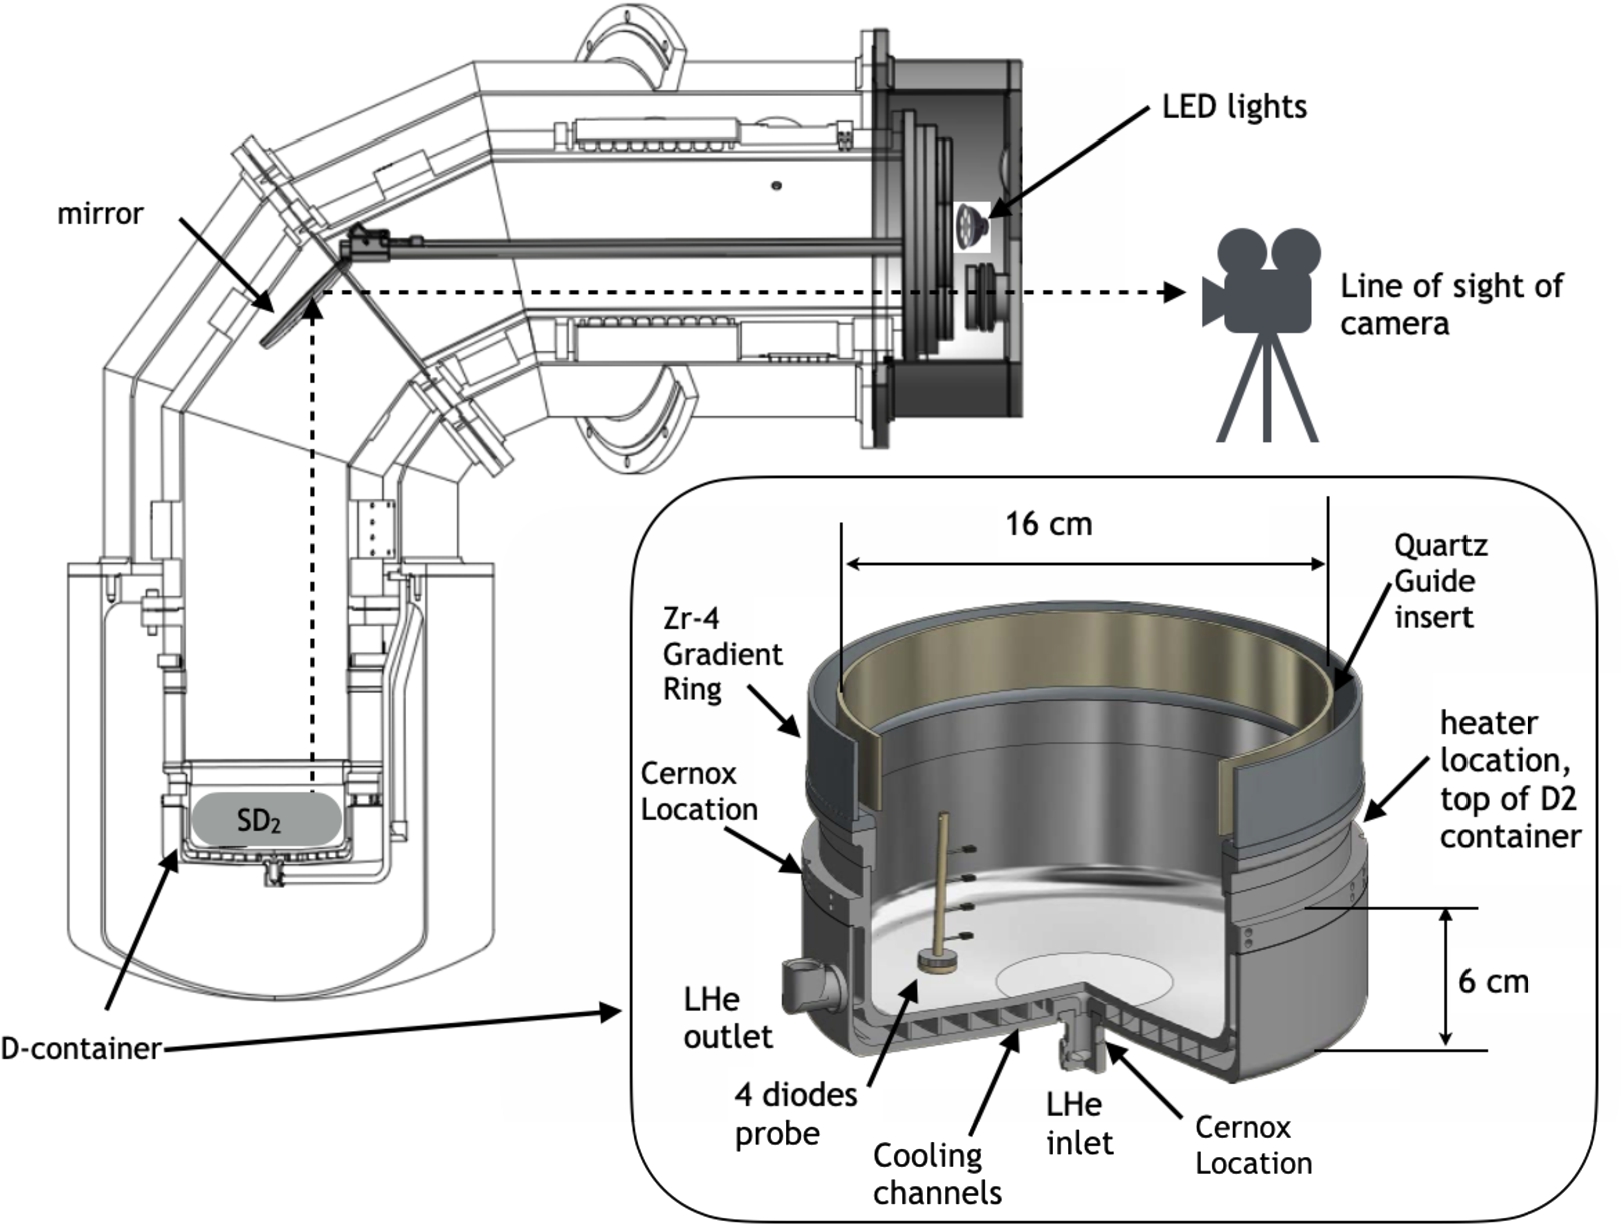 Cross-sectional view of the experimental set-up: the camera was located outside the vacuum jacket; a warm optical window was mounted on the vacuum jacket, another one on the cold cryostat flange; LED light source was mounted inside the vacuum jacket; a mirror with an adjustable angle was located inside the inner vacuum. Deuterium was solidified in the D-container at the bottom part of the cryostat. The insert shows a 3D-rendering of the D-container including locations of the instrumentation: a heater made of NiCr wire; two Cernox temperature sensors, one located at the LHe inlet, another just below the heater on the outer wall of the container; a holder made of PEEK with 4 calibrated diodes ( lakeshore, DT-670-SD ) separated vertically by 1 cm and positioned inside the container to probe temperatures directly inside the SD2 bulk.